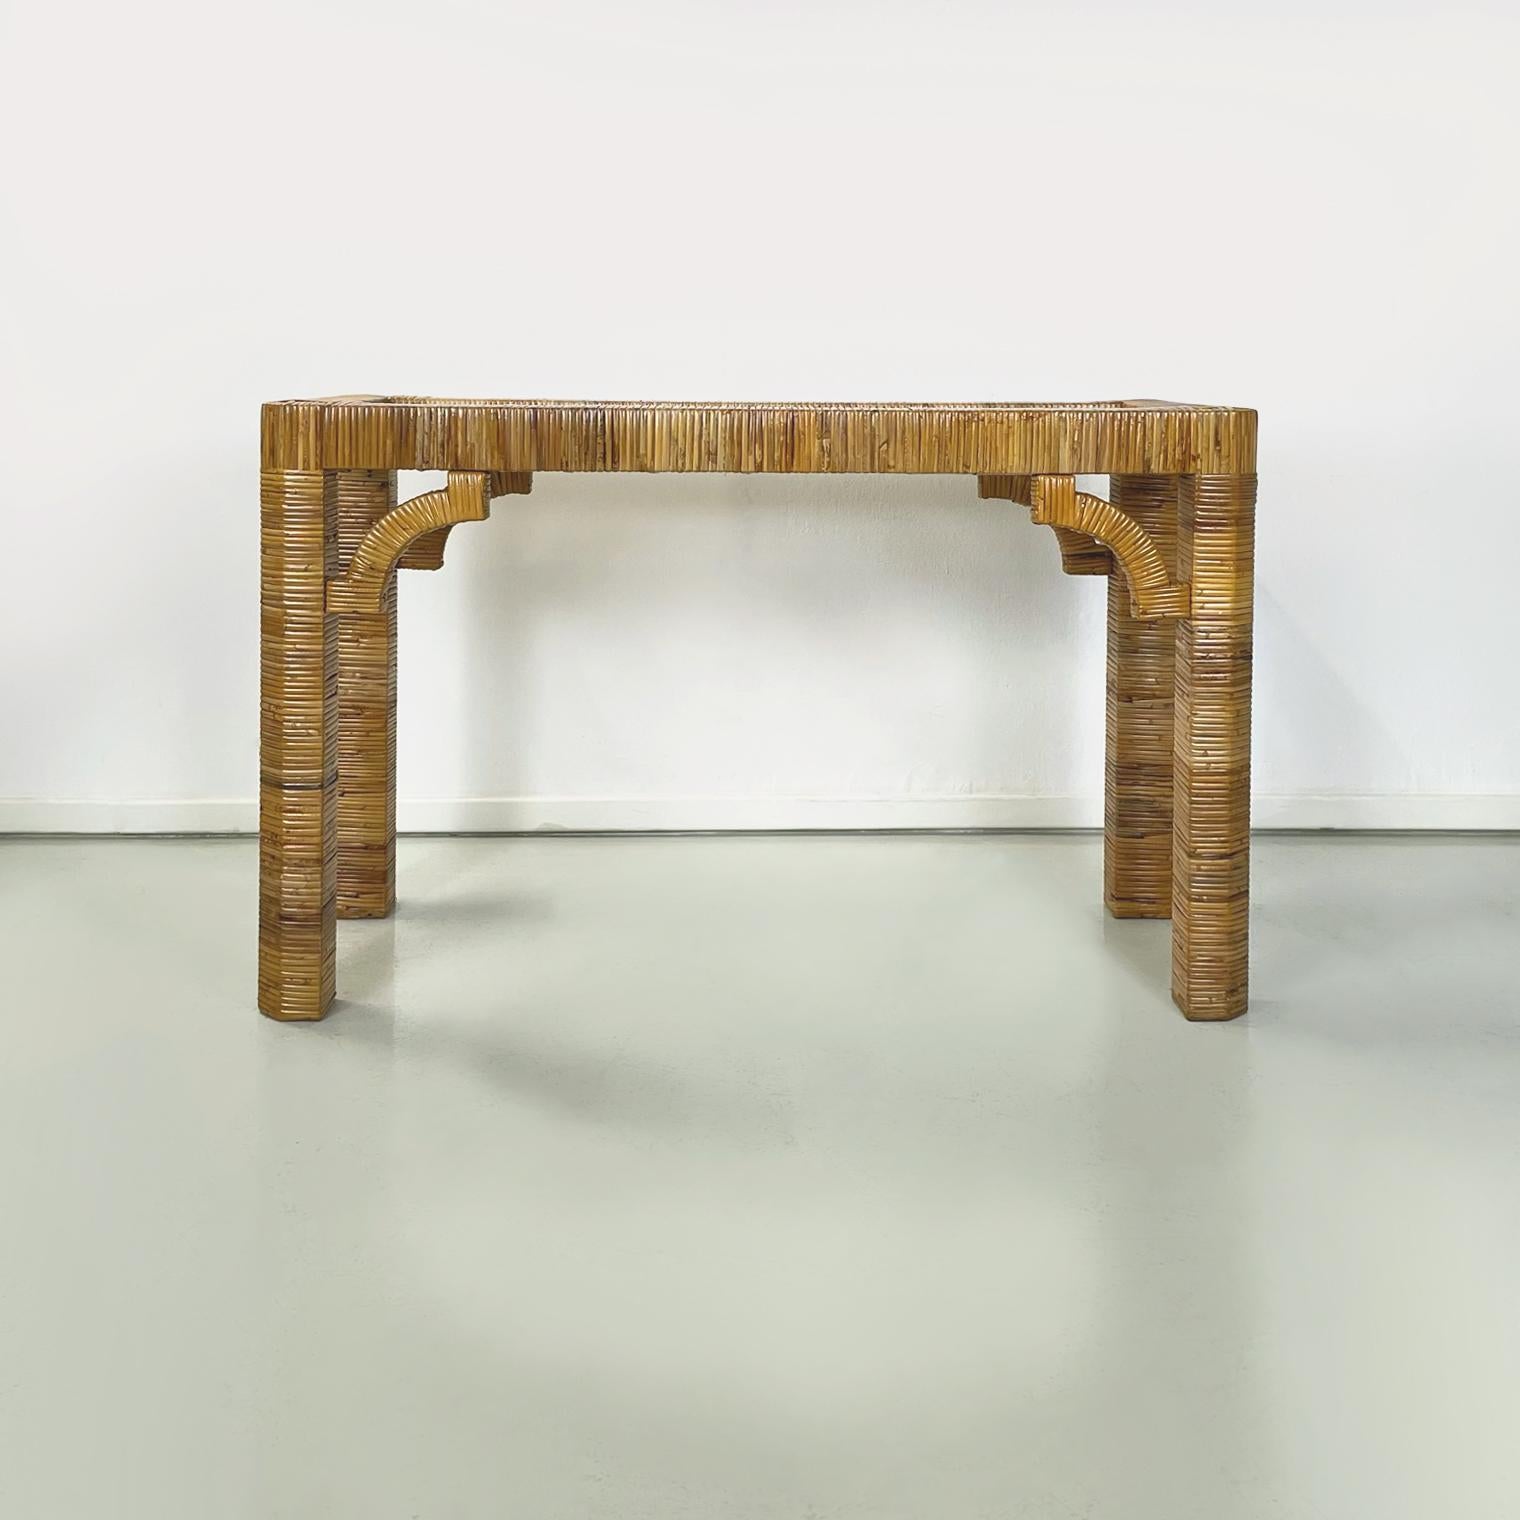 Italian modern Console Creola by Puri Purini and Mariani for Vivai del Sud 1970s
Console belonging to the Creola series in finely woven rattan. The rectangular top has a thick rattan profile and glass interior. Legs with square section, also in